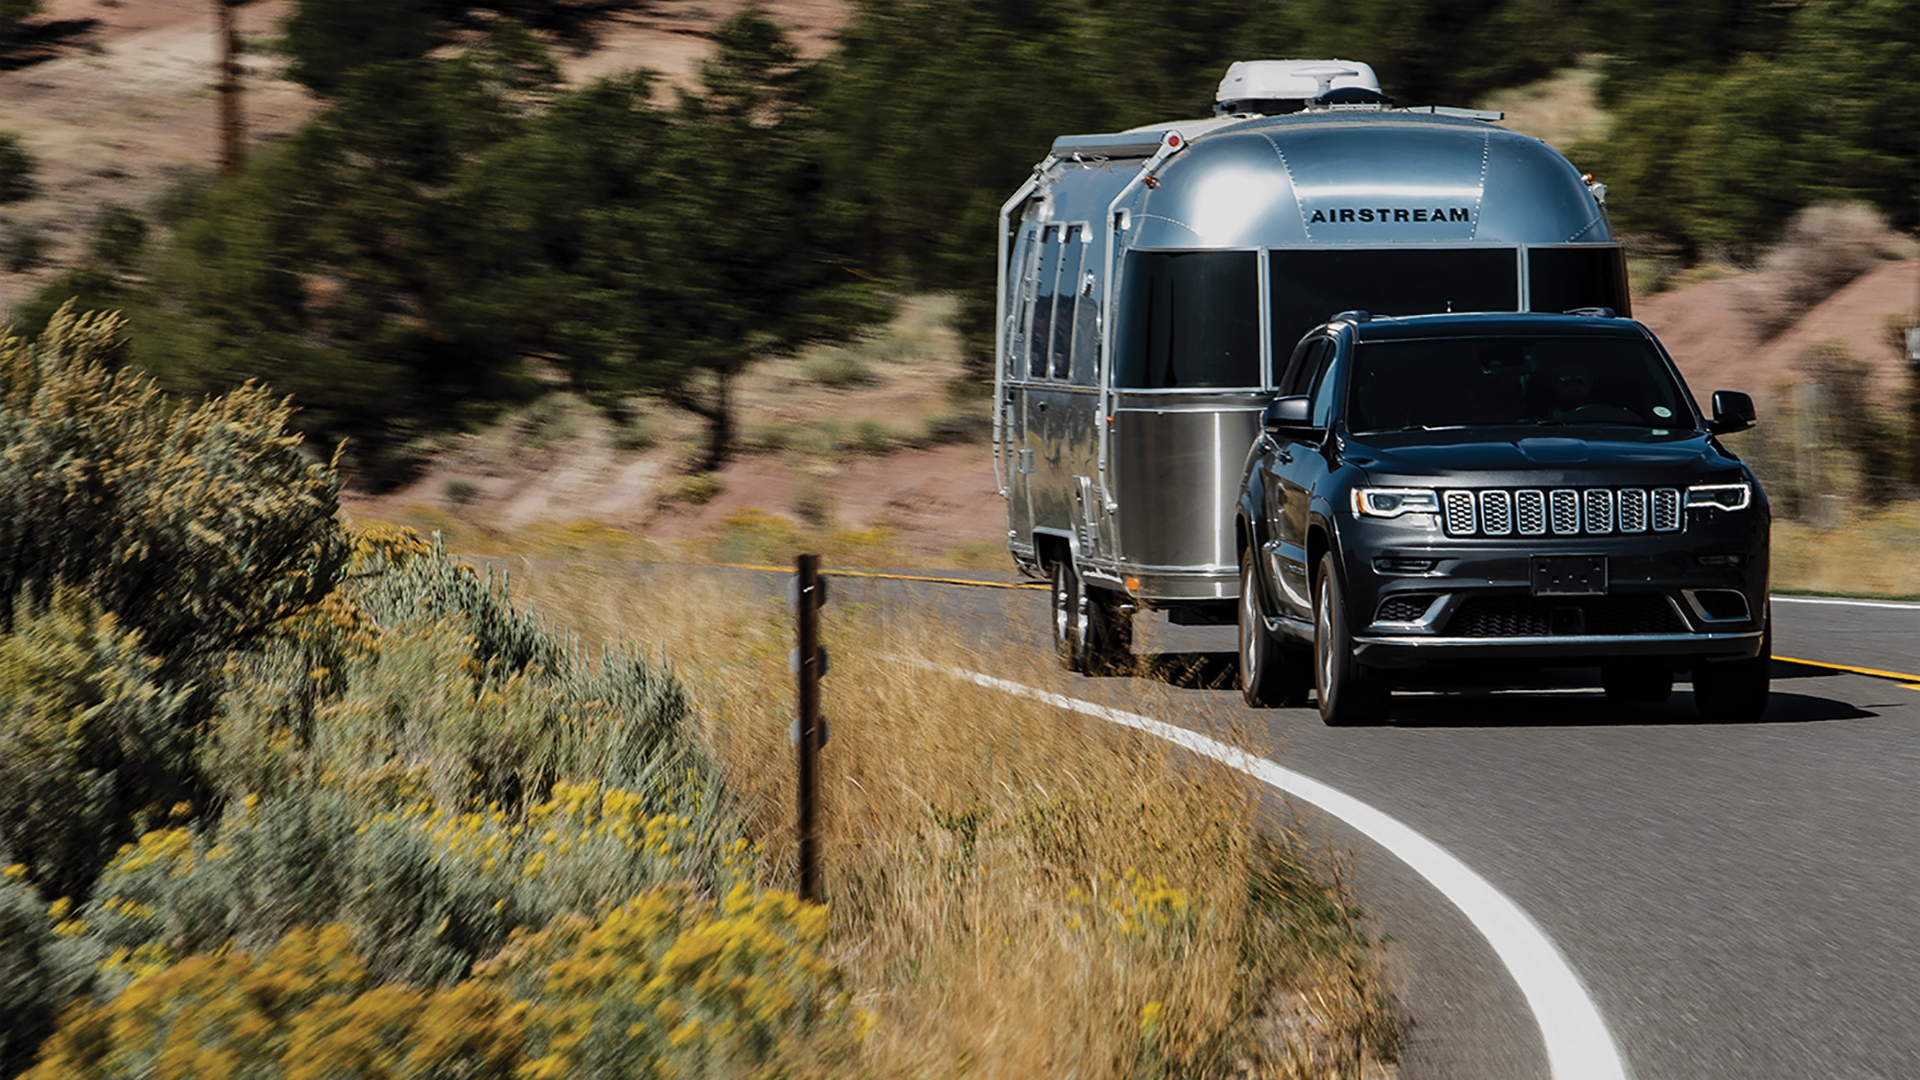 Airstream-Travel-Trailer-going-around-a-curve